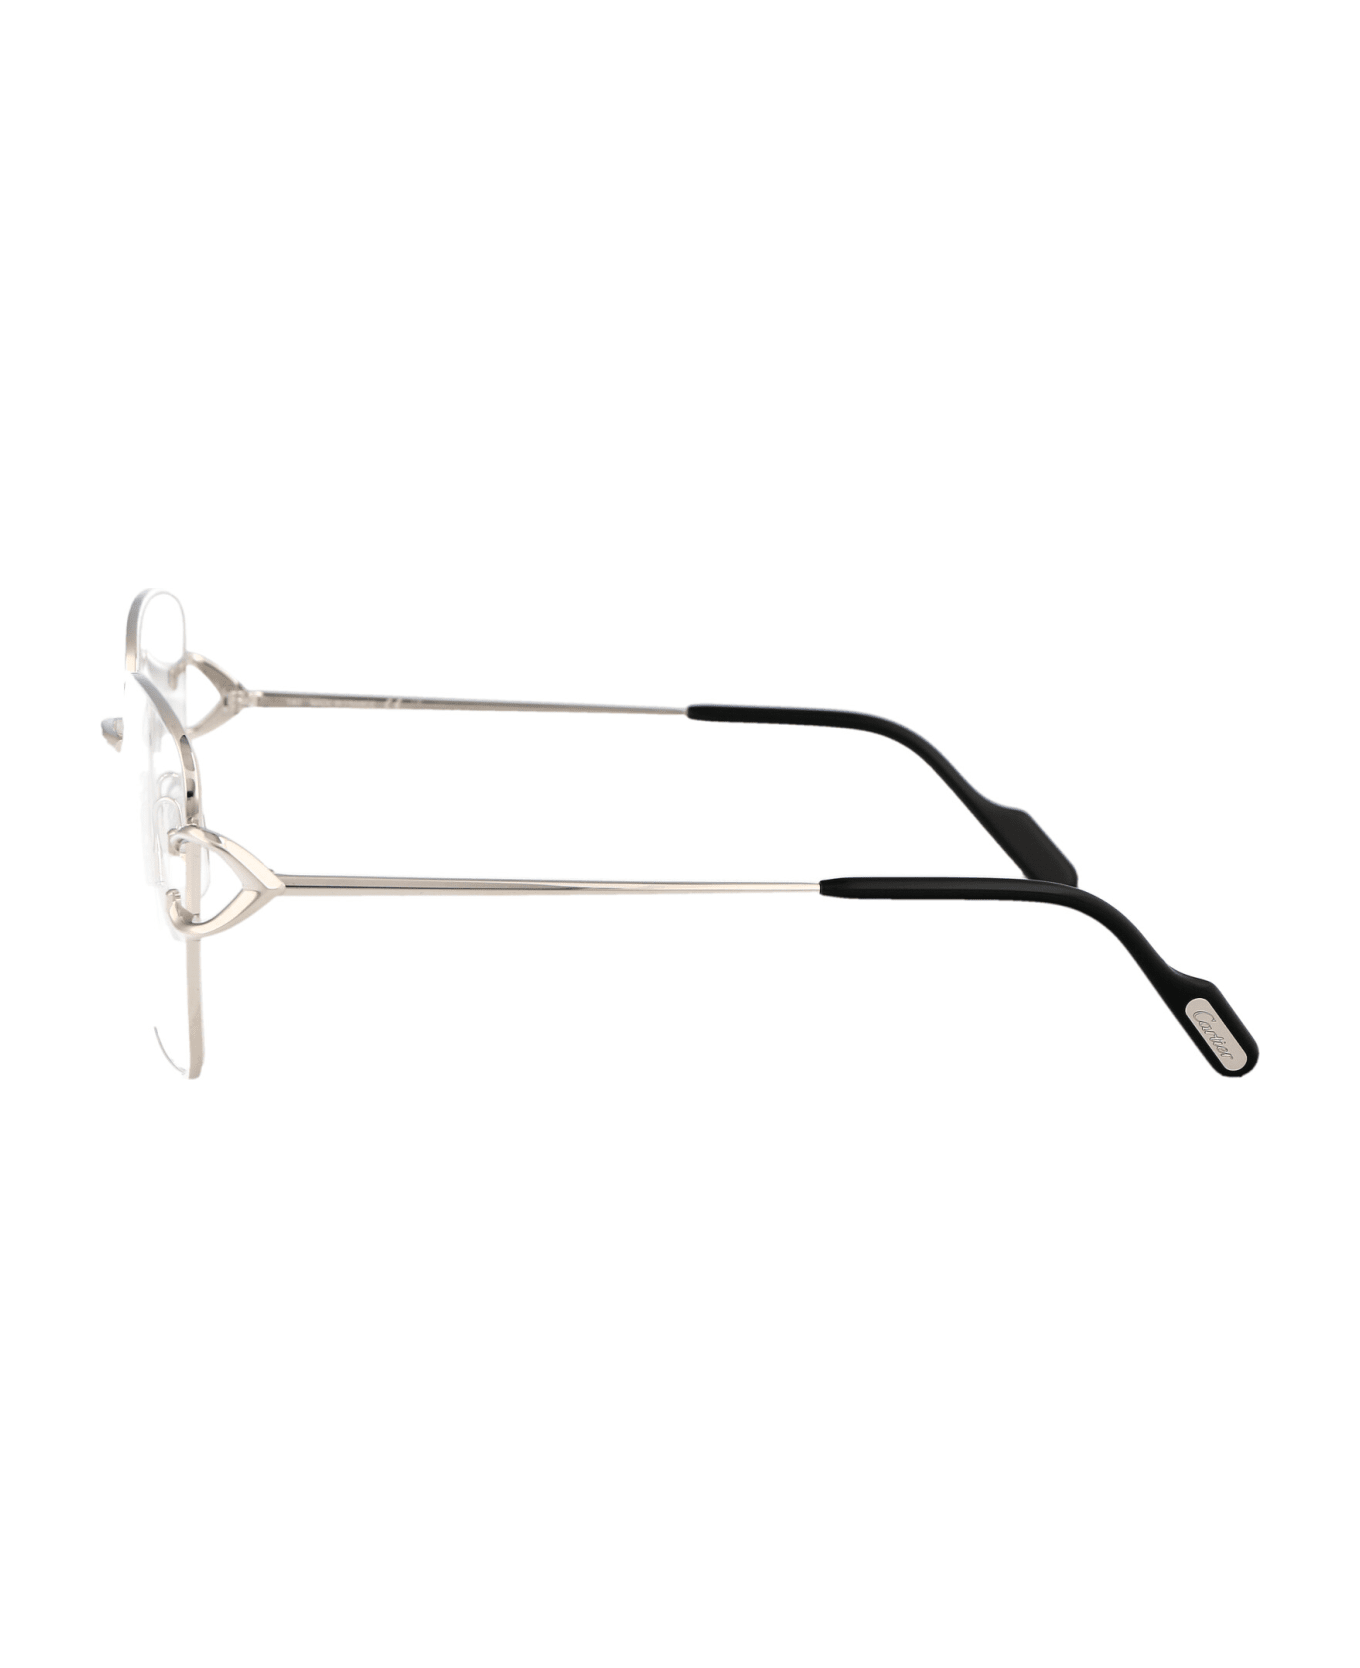 Cartier Eyewear Ct0486o Glasses - 002 SILVER SILVER TRANSPARENT アイウェア